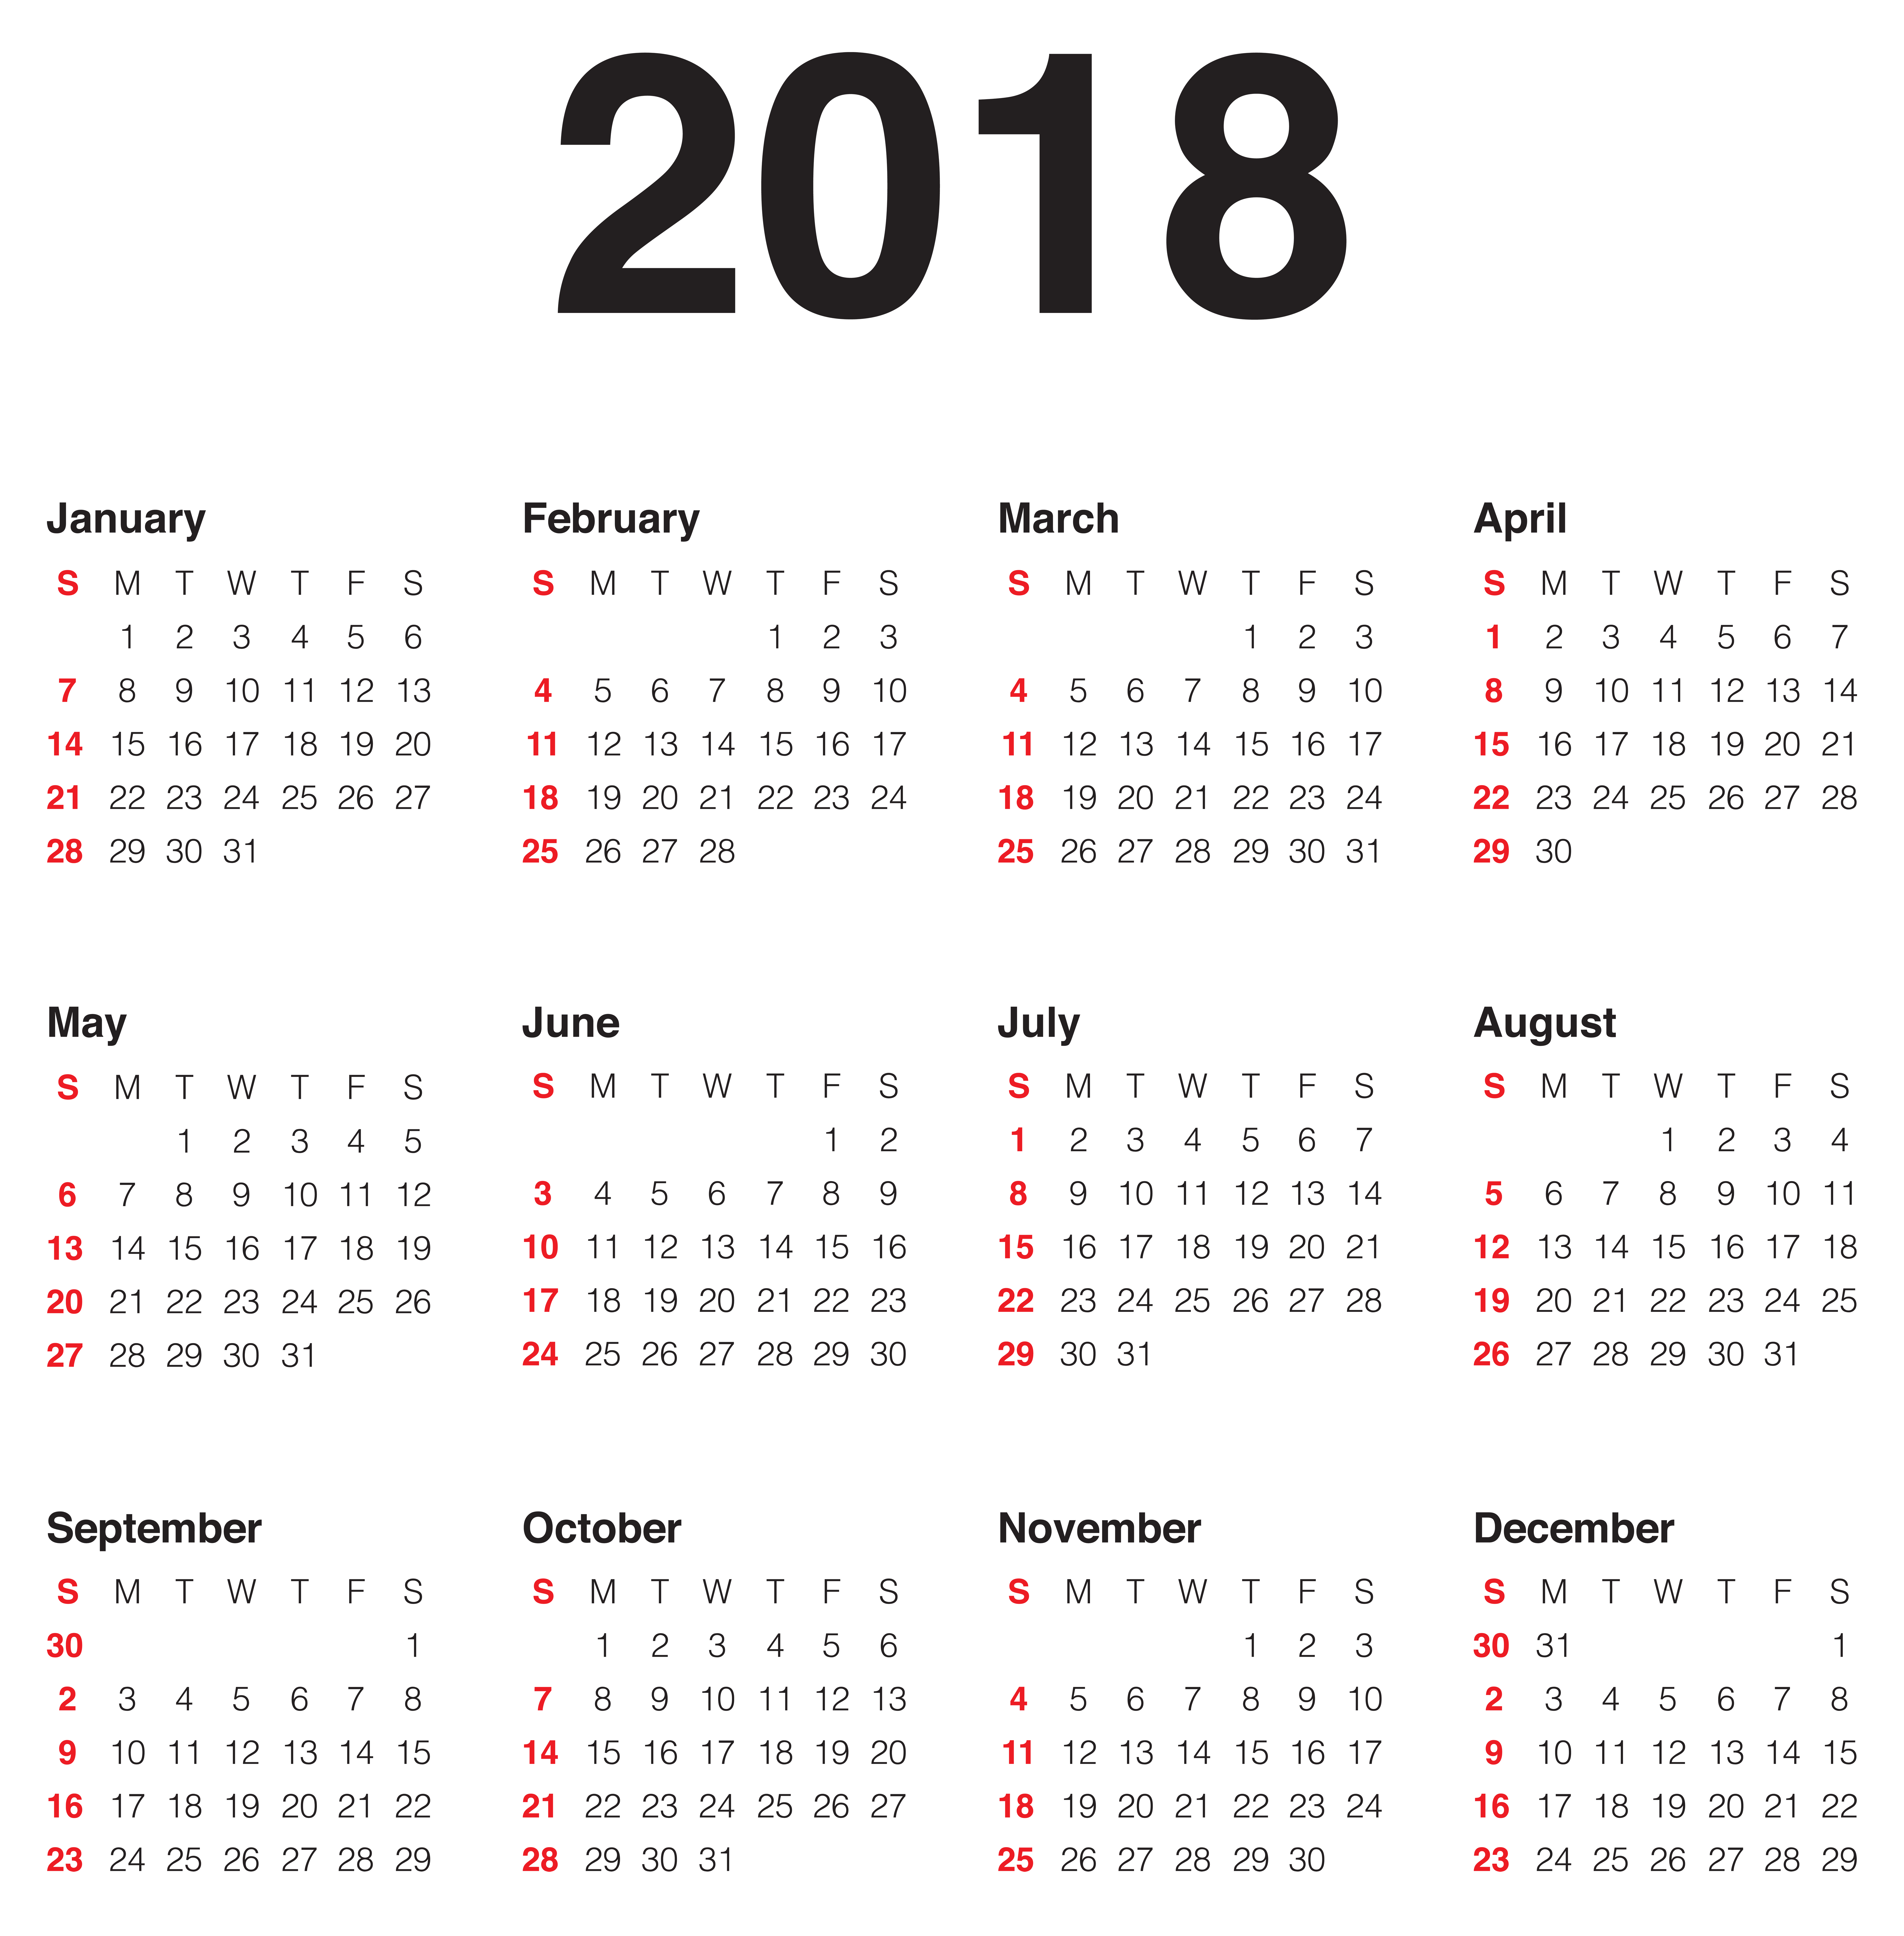  transparent png clip. Wednesday clipart weekly calendar